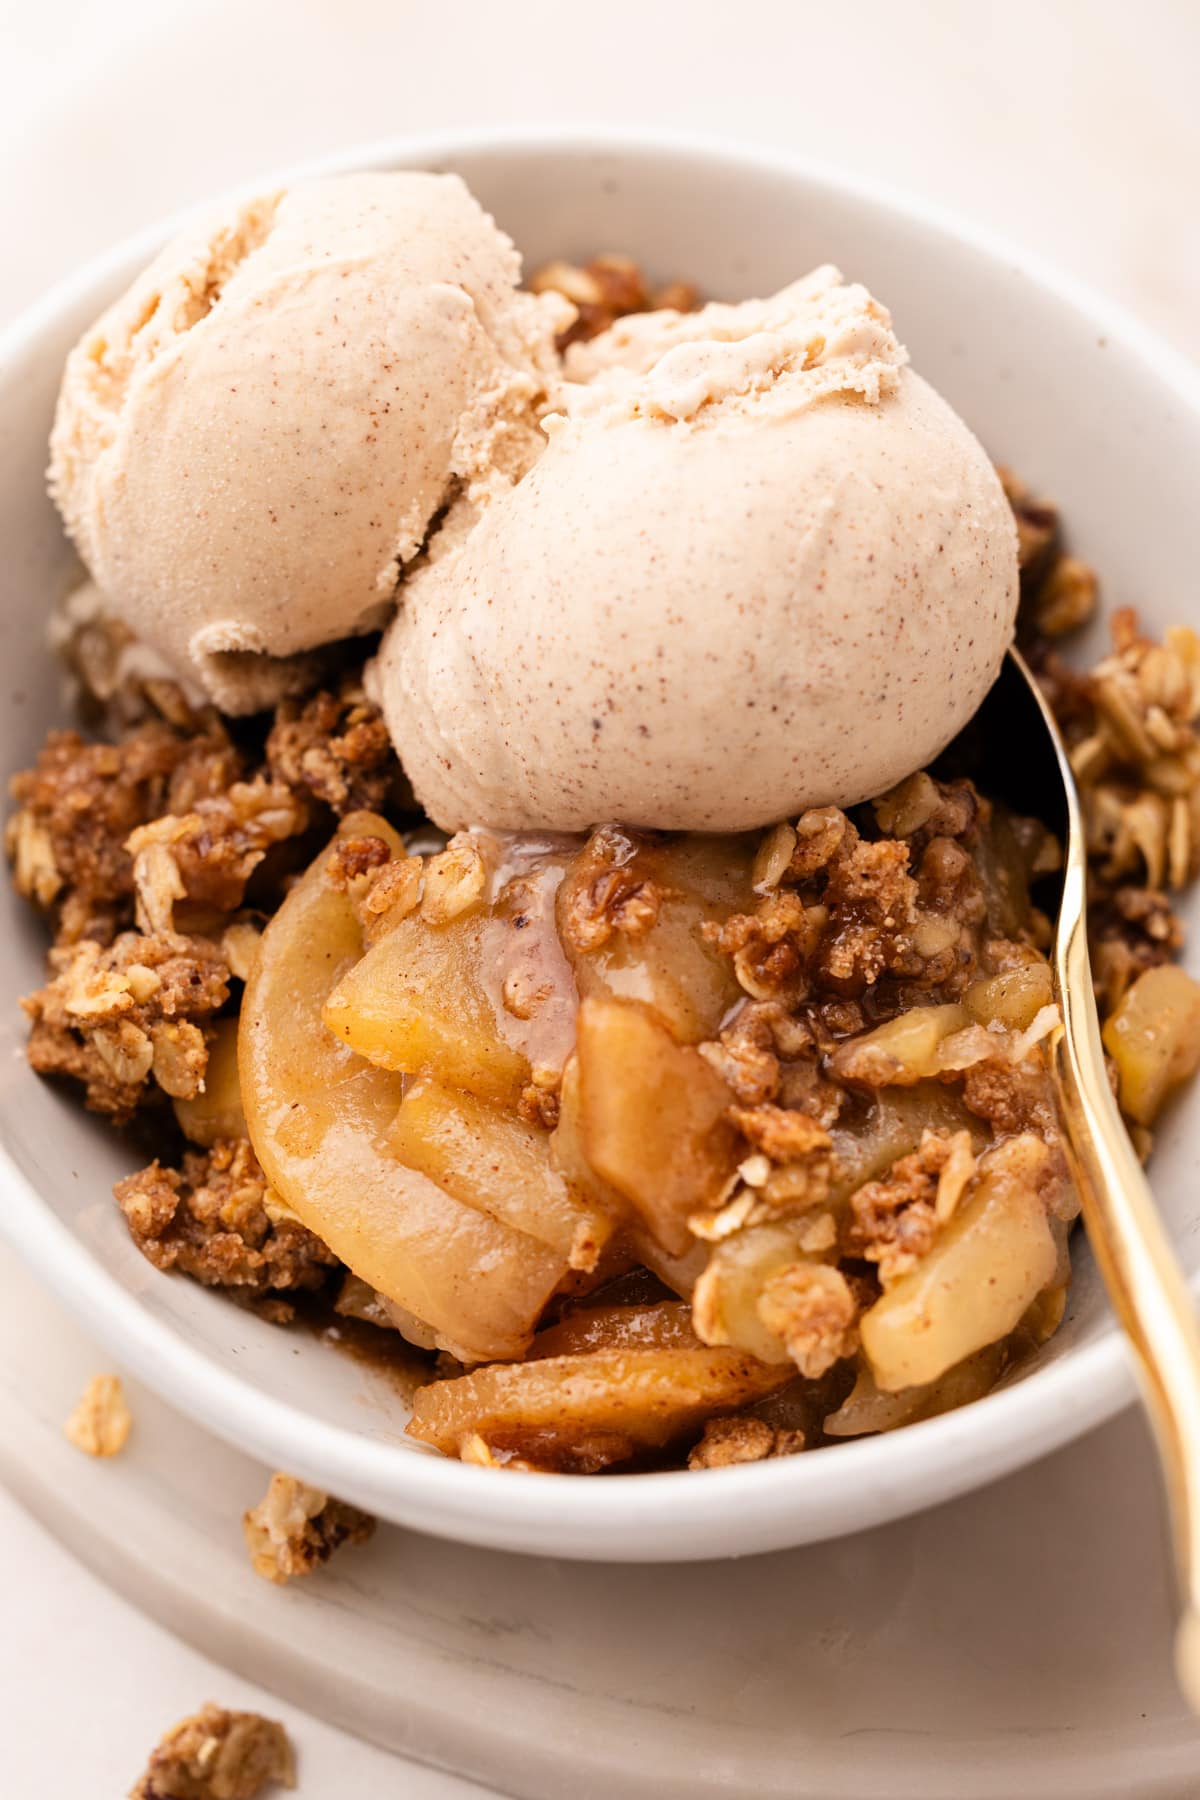 A bowl of baked apple crisp made from wholesome ingredients topped with ice cream.